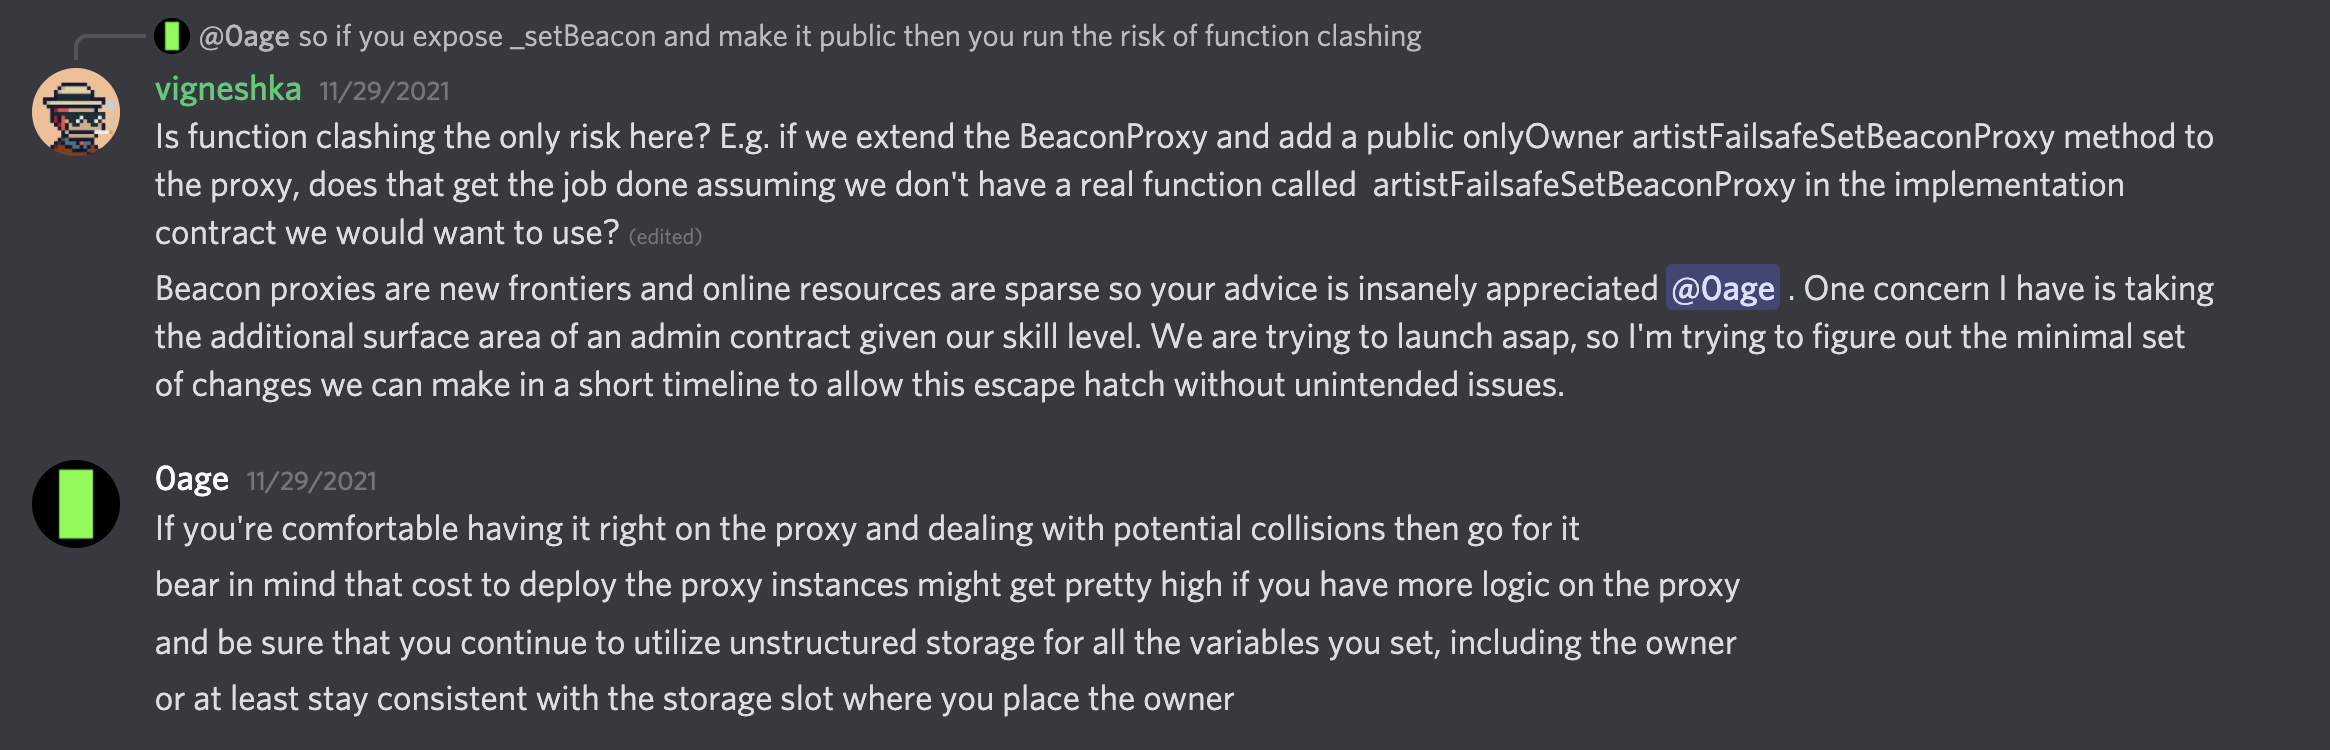 Beacon proxies are new frontiers and online resources are sparse so your advice is insanely appreciated, @0age